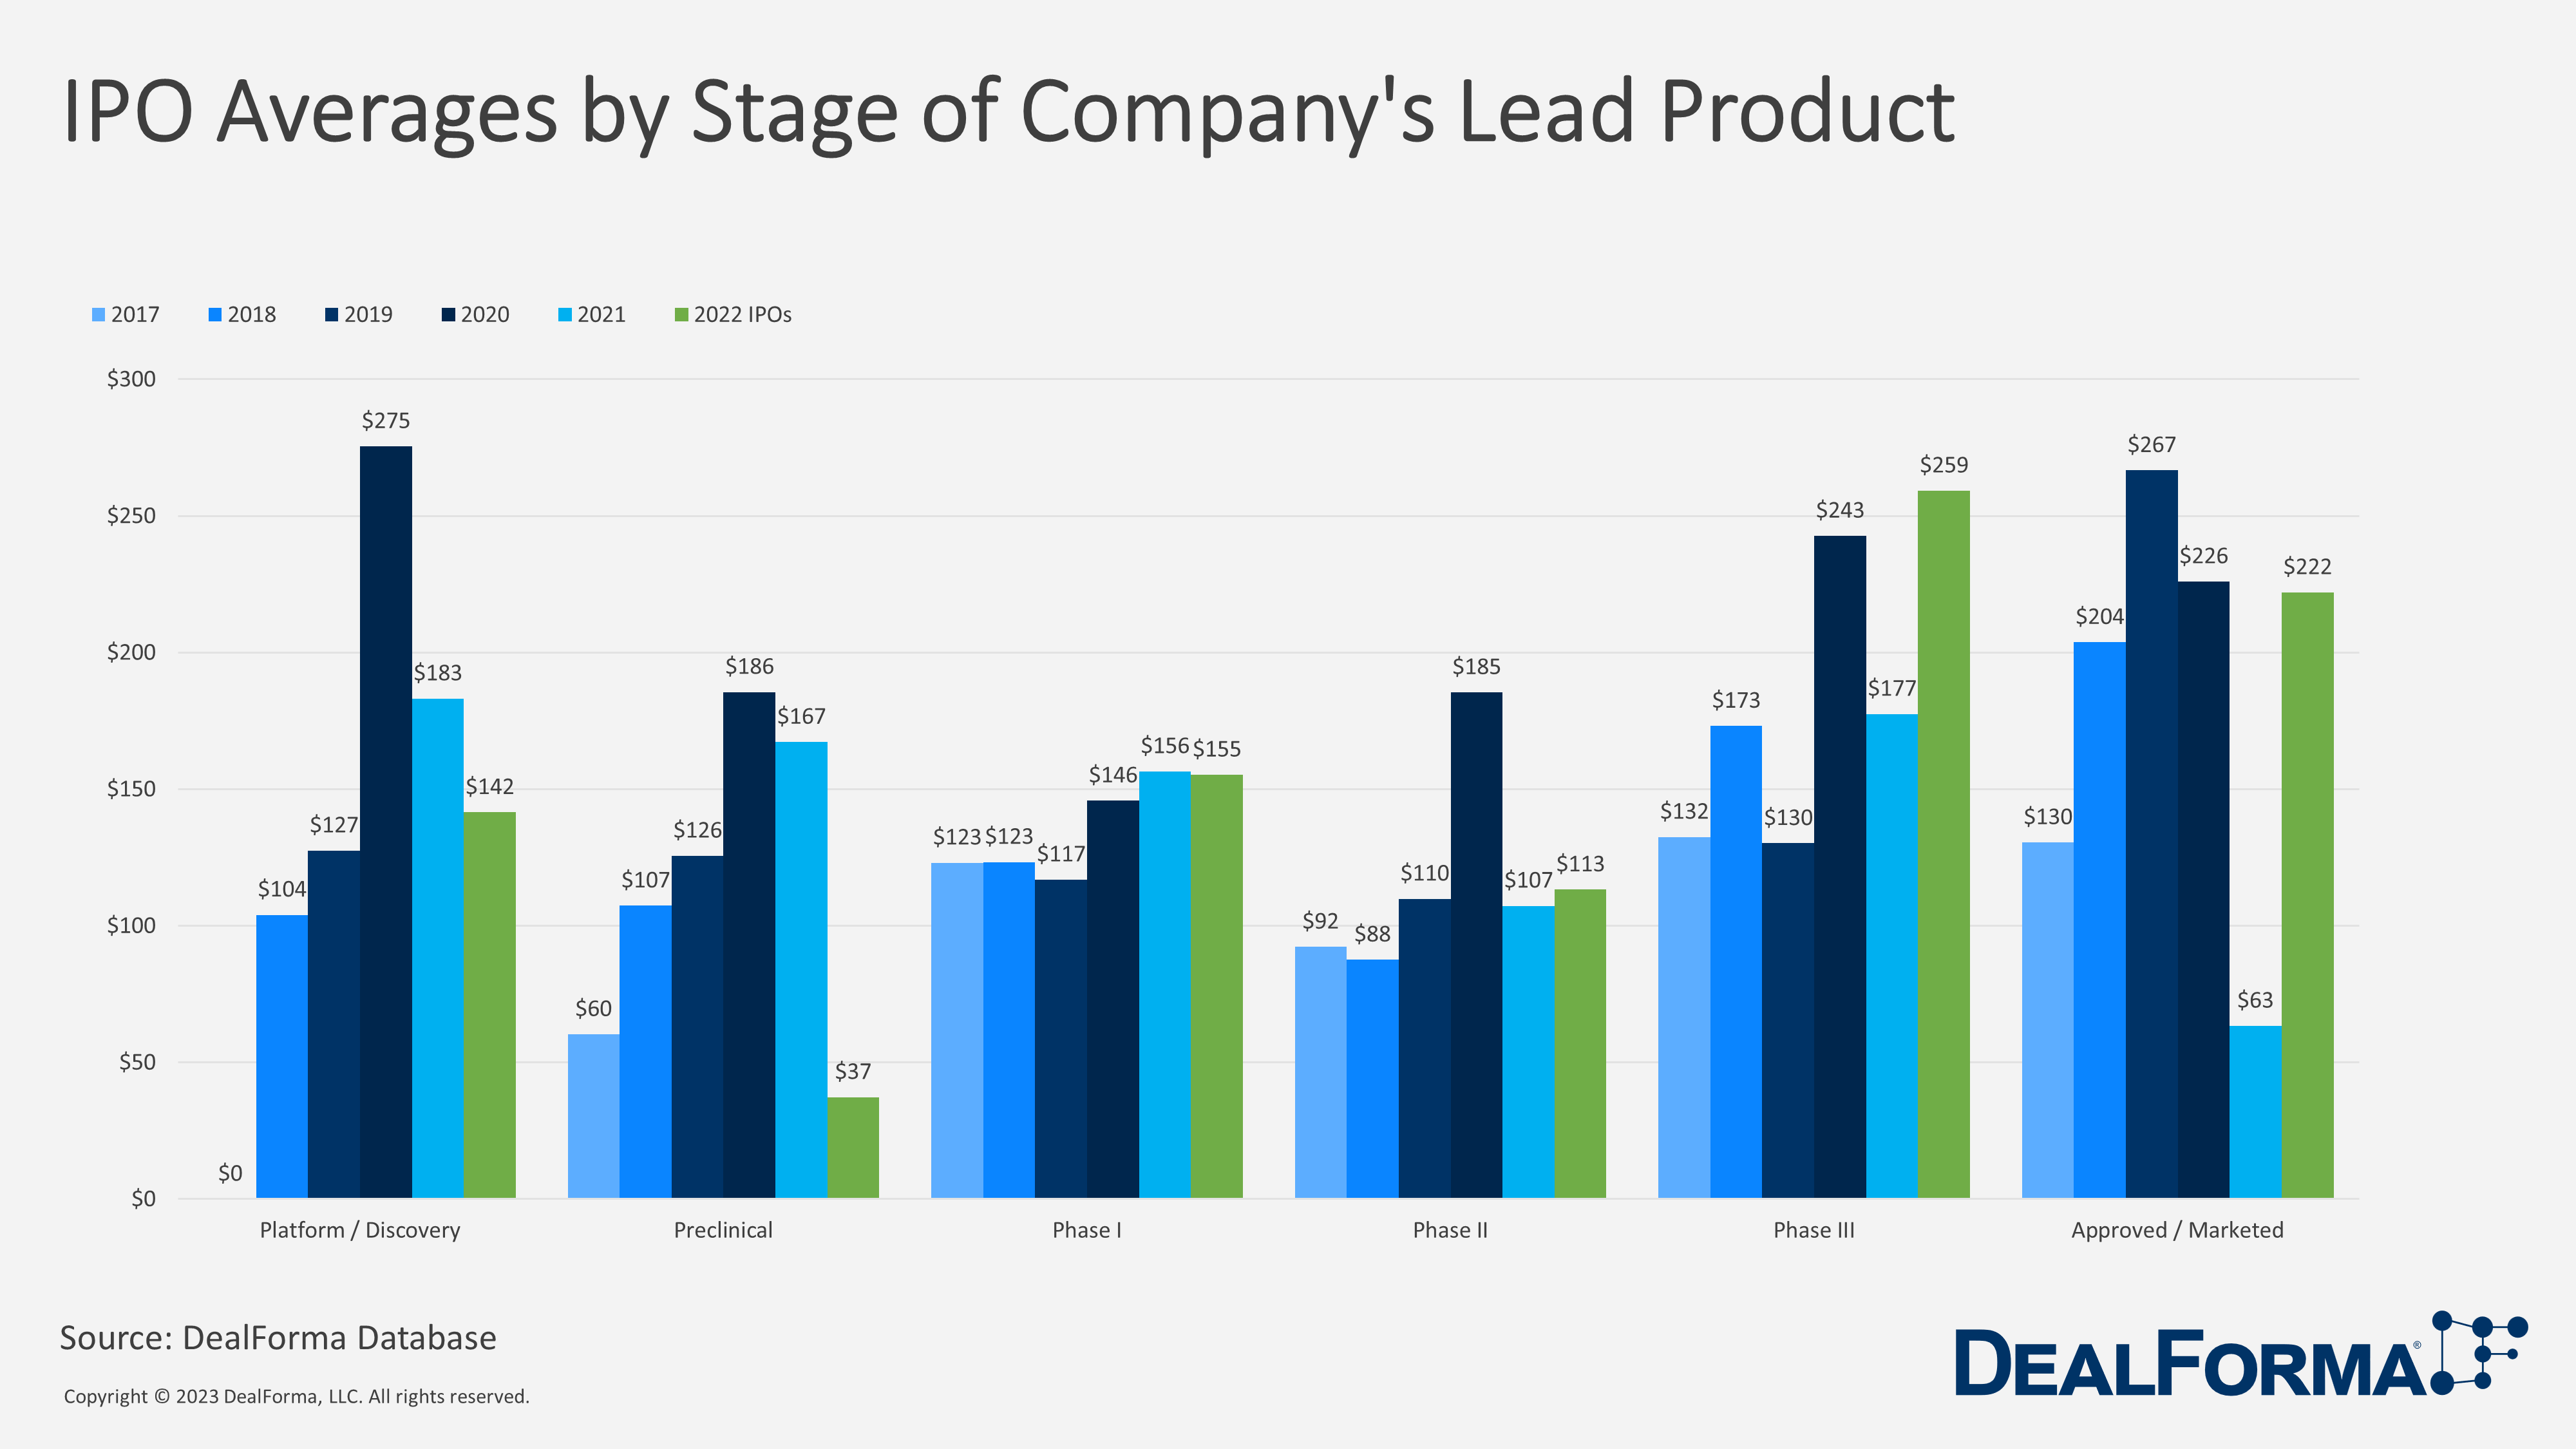 IPO Averages by Stage of Company's Lead Product